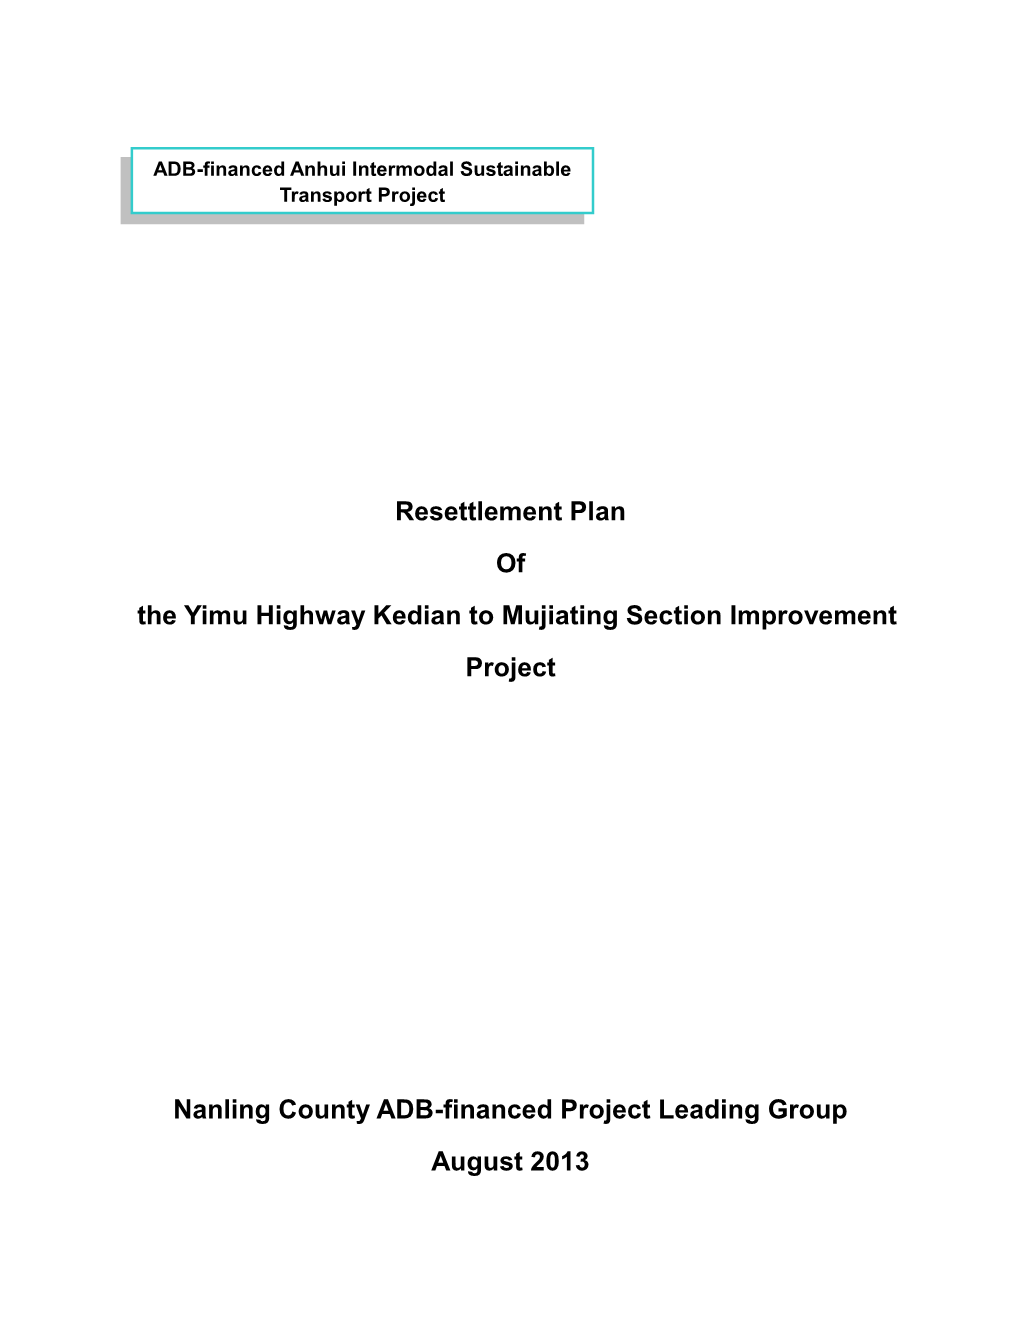 Resettlement Plan of the Yimu Highway Kedian to Mujiating Section Improvement Project